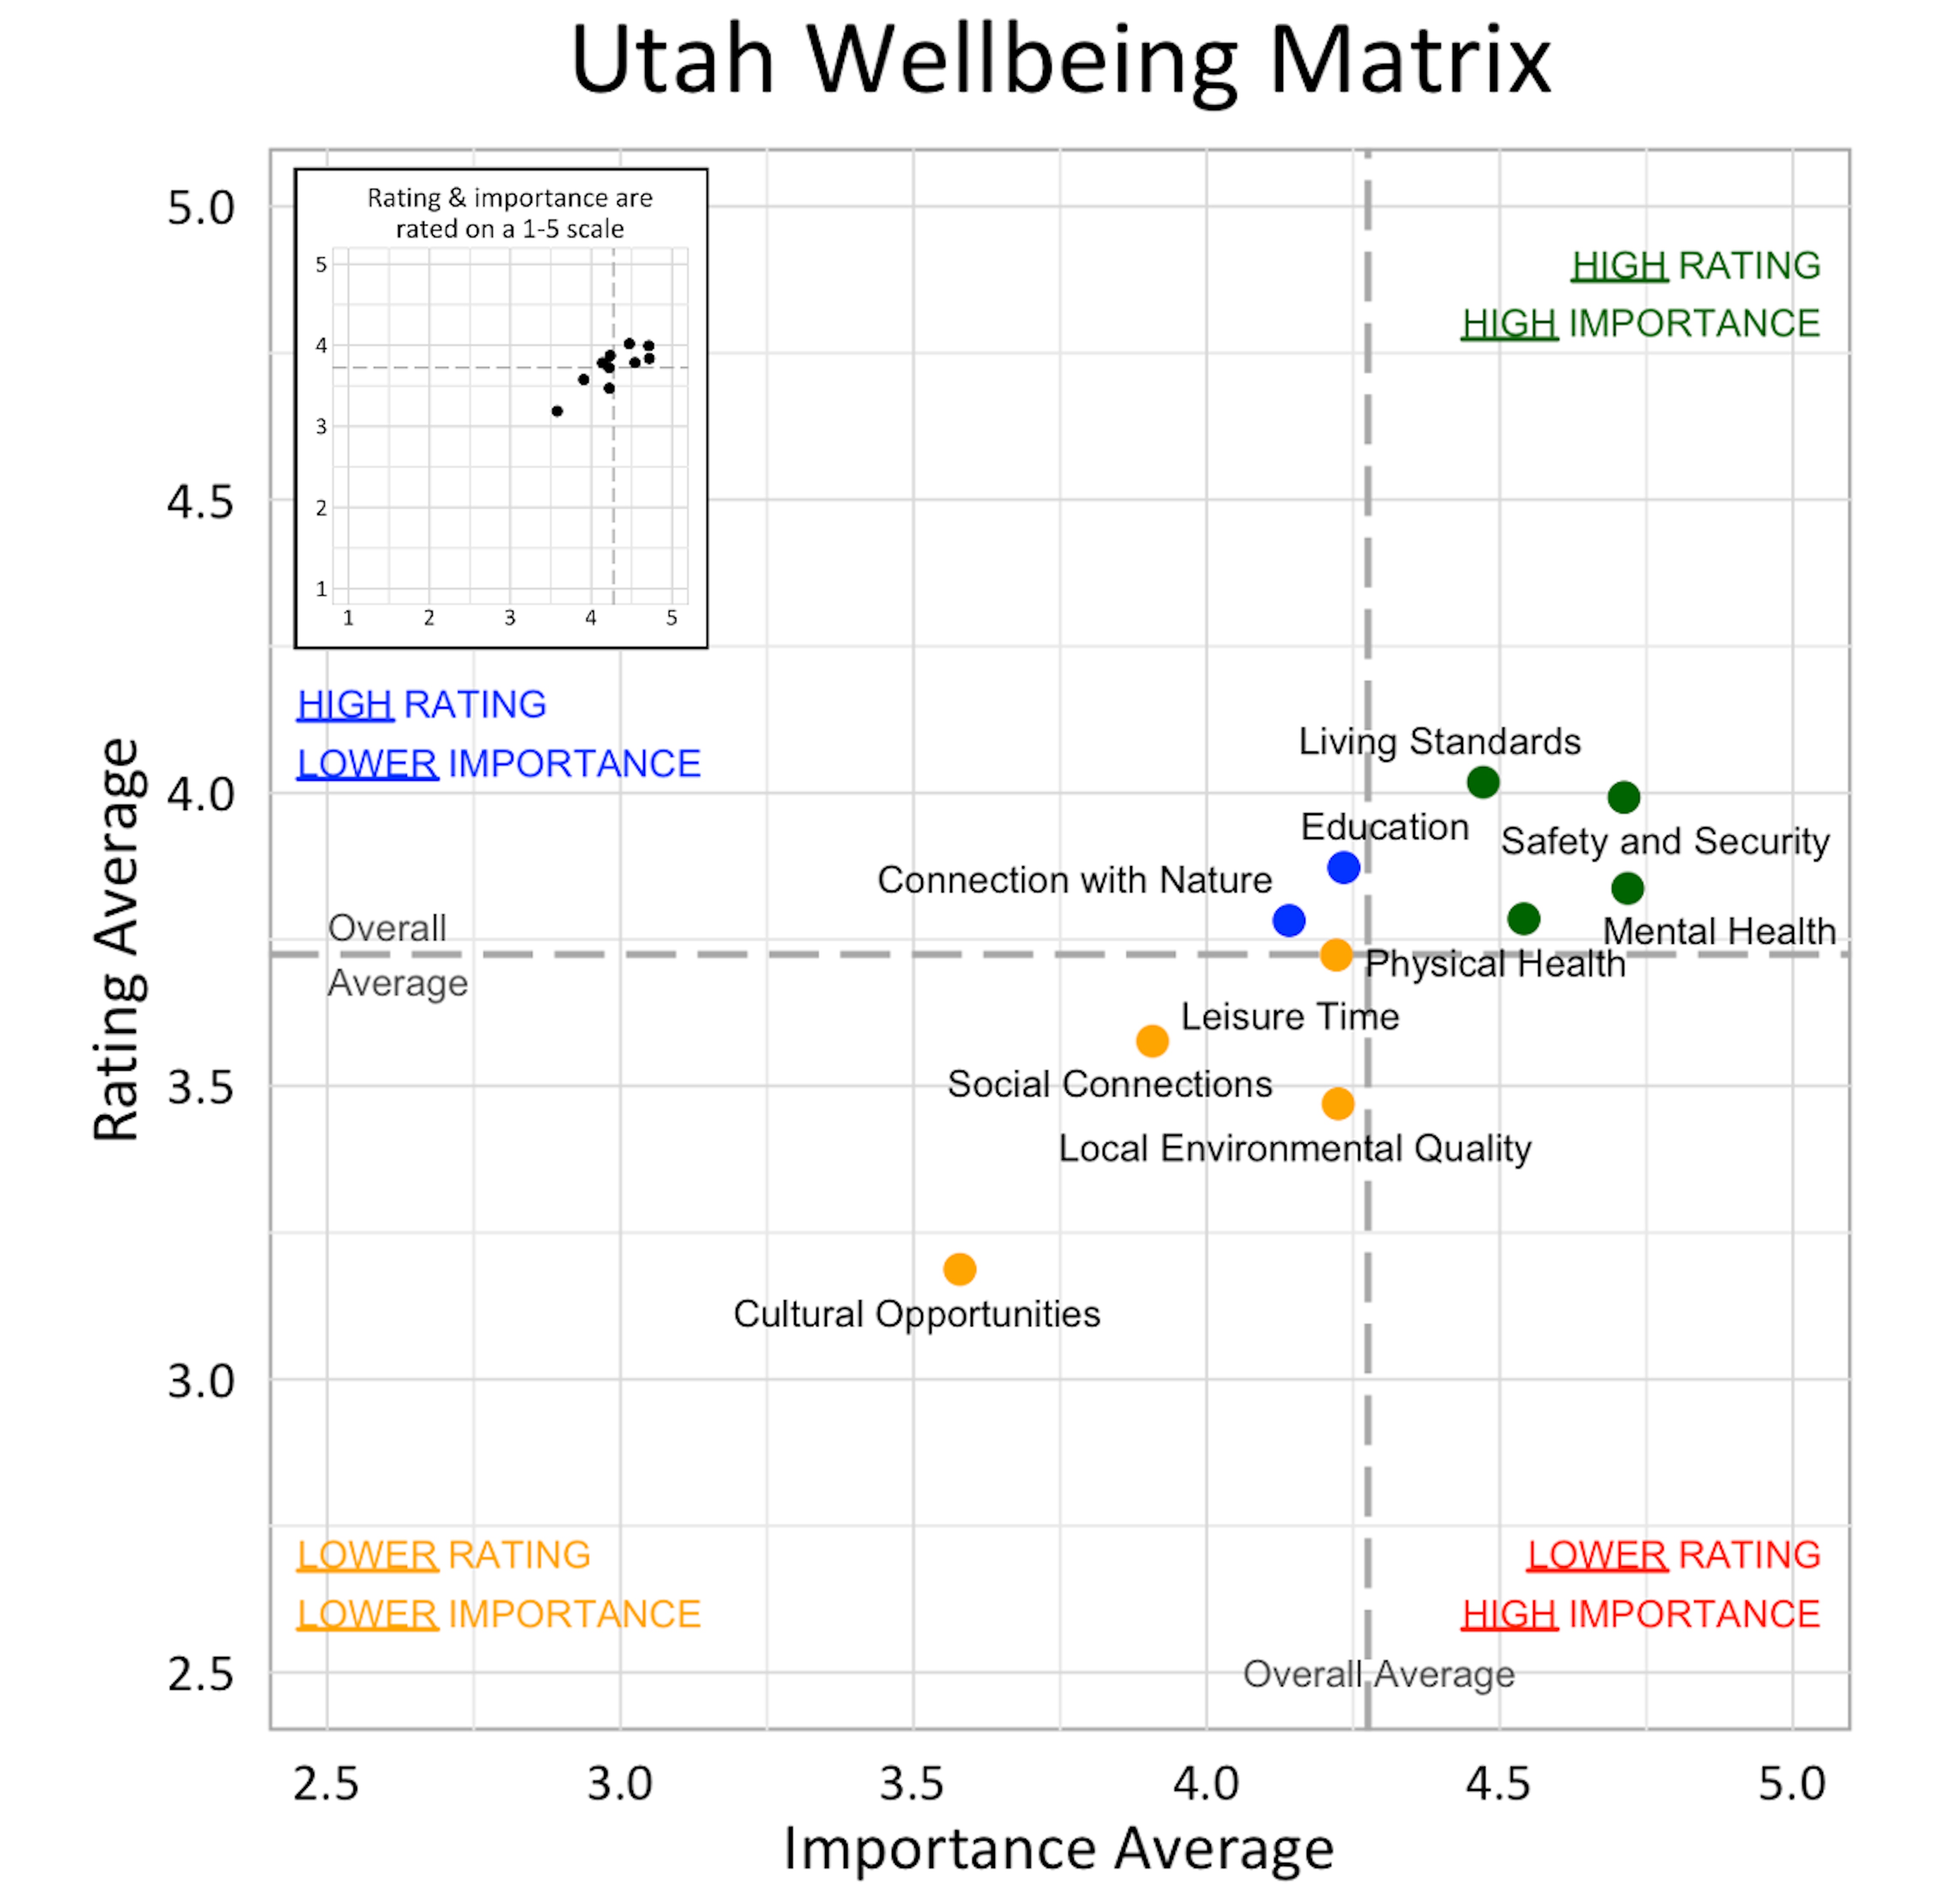 Scatterplot. Title: Utah Wellbeing Matrix. Domains are classified into four quadrants depending on their average rating and average importance as compared to the average of all the average domain ratings and the average of all the average domain importance ratings. High rating, high importance (green quadrant) domains include: Safety and Security, Living Standards, and Mental and Physical Health. High rating, lower Importance (blue quadrant) domains include: Education and Connection with Nature. Lower rating, lower importance (yellow quadrant) domains include: Leisure Time, Social Connections, Local Environmental Quality, and Cultural Opportunities. Lower rating, high importance (red quadrant) domains include: None.